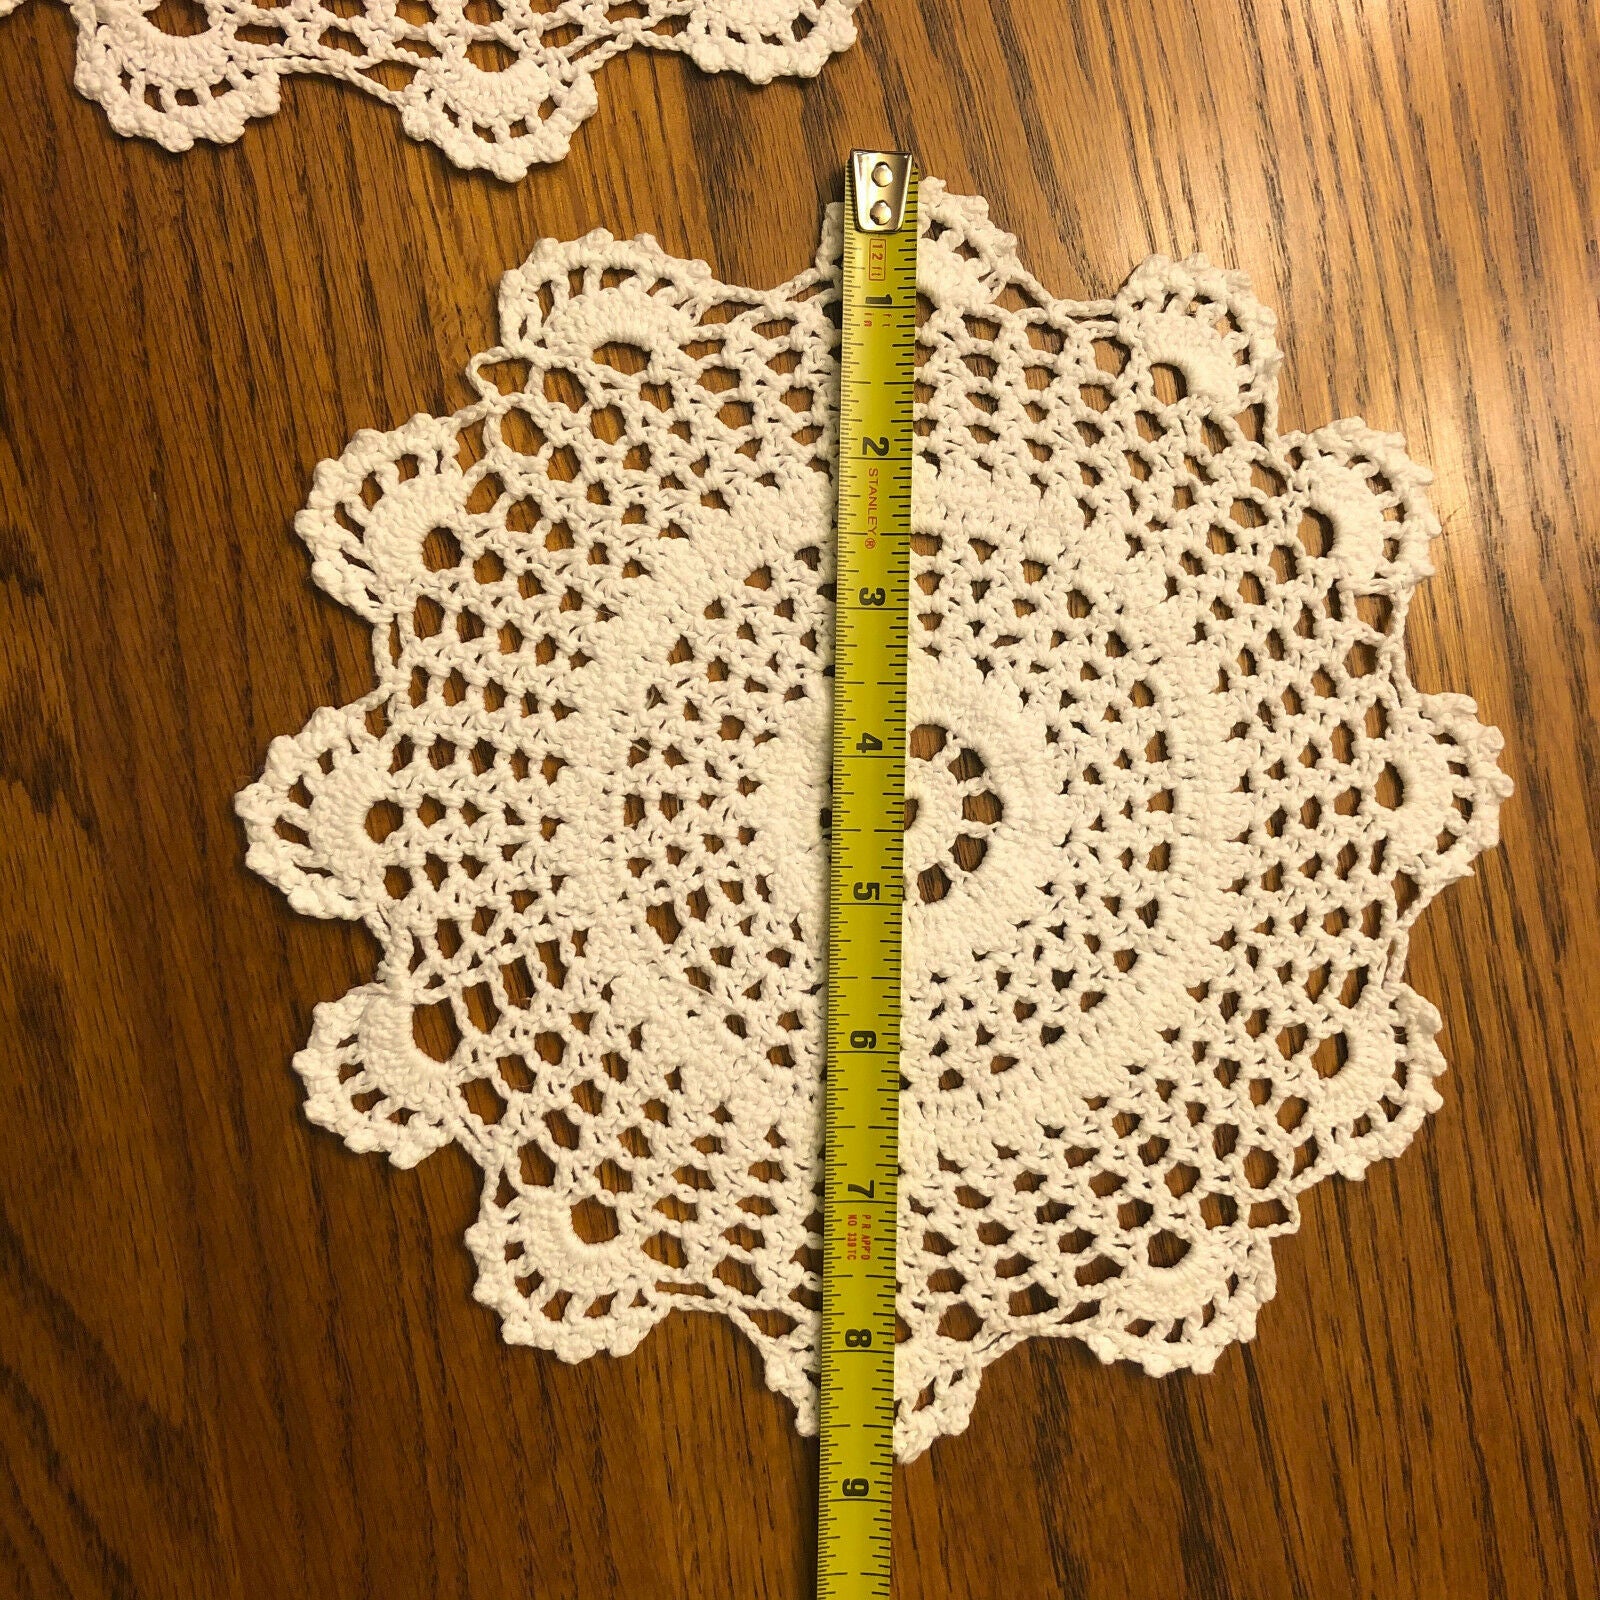 2 Vintage Handmade Crochet Doilies with Scalloped Edges- Beautiful